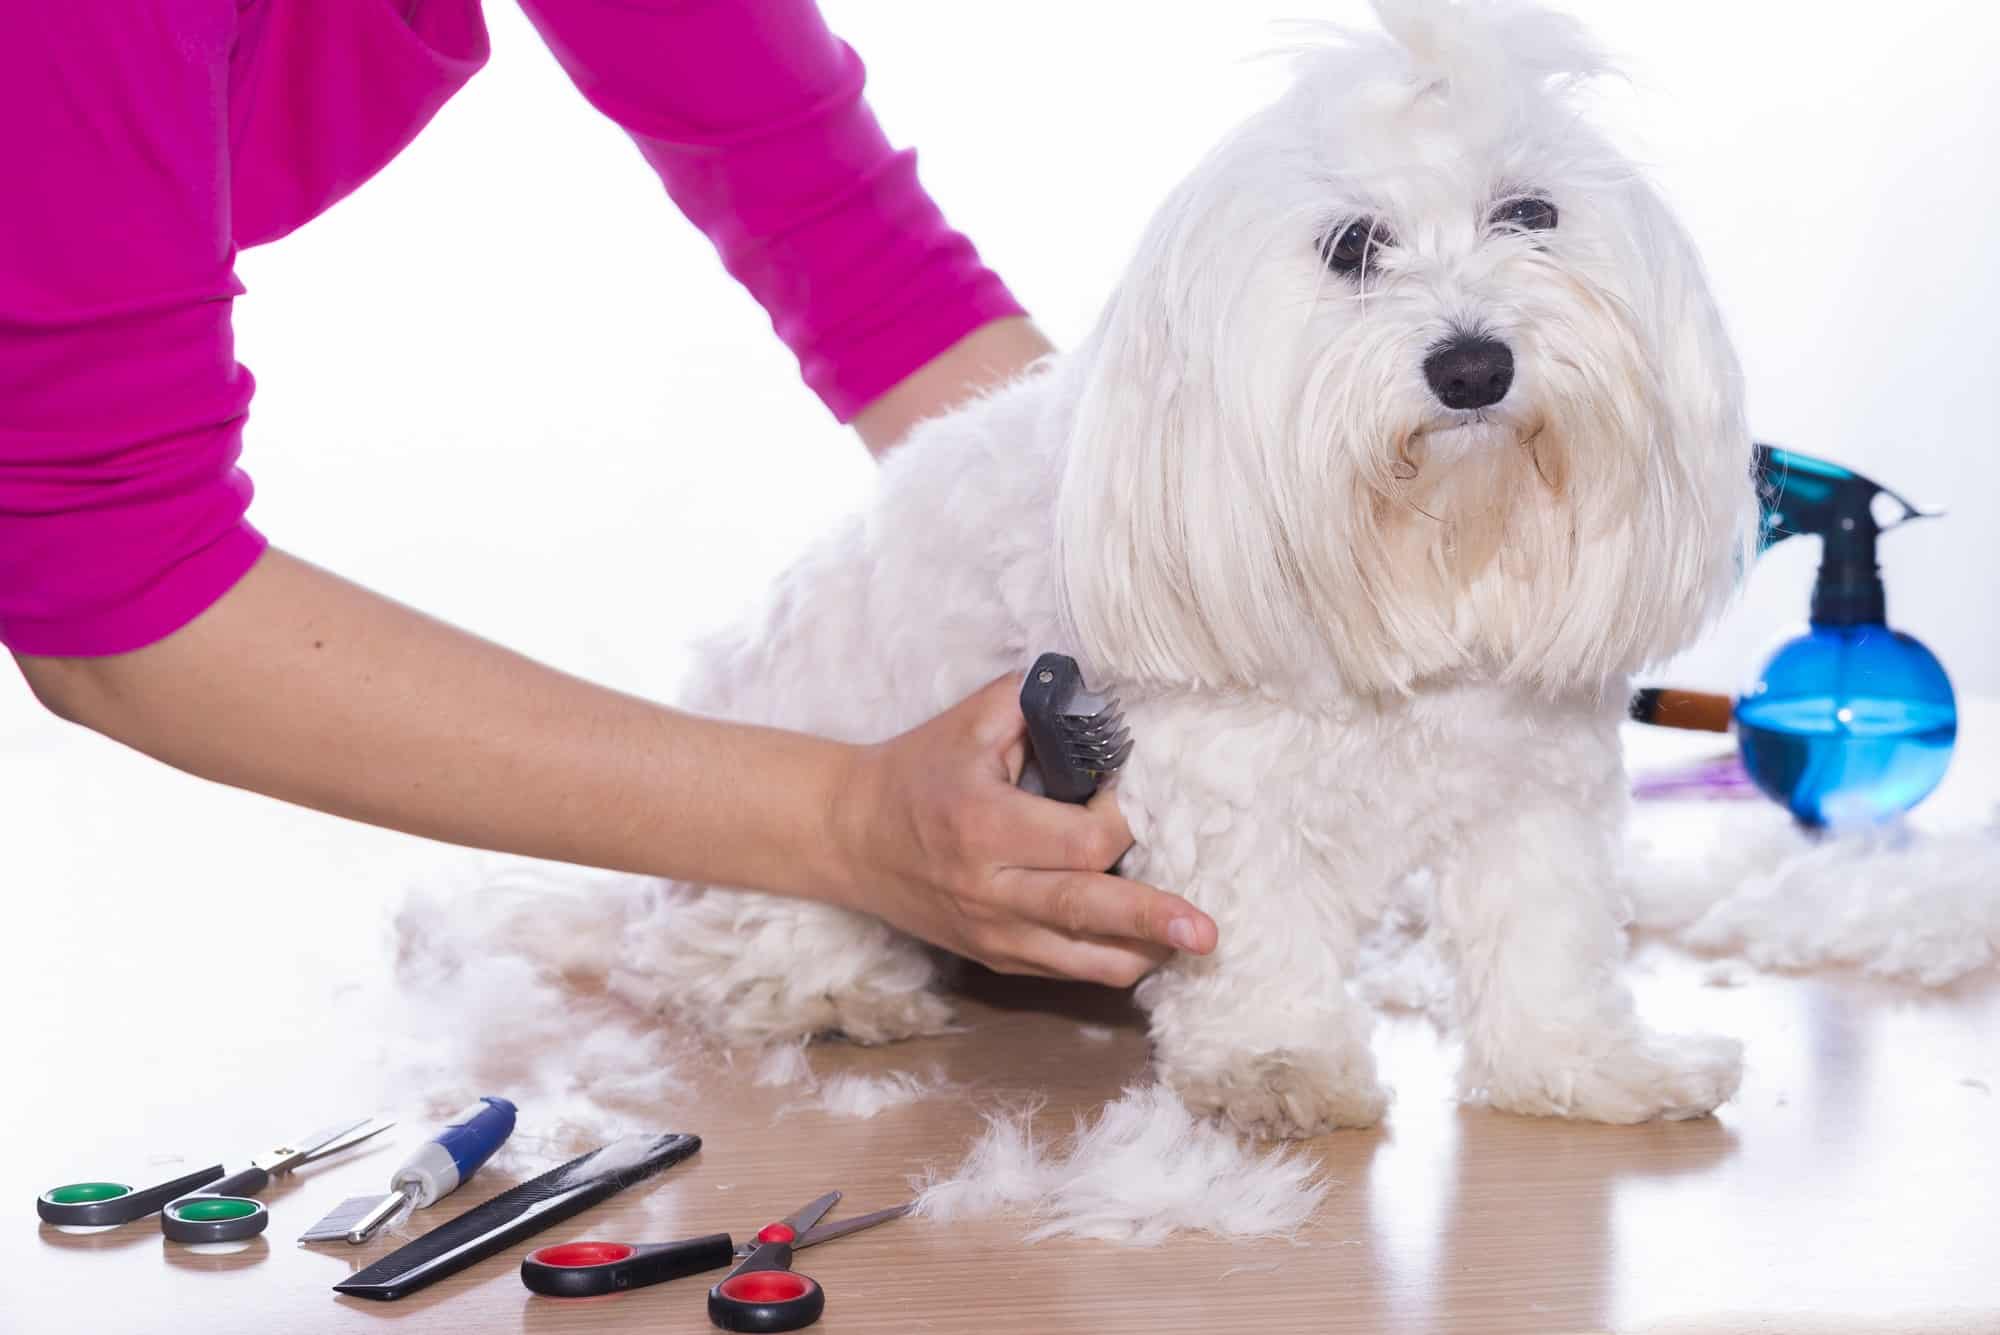 common dog body injuries while grooming